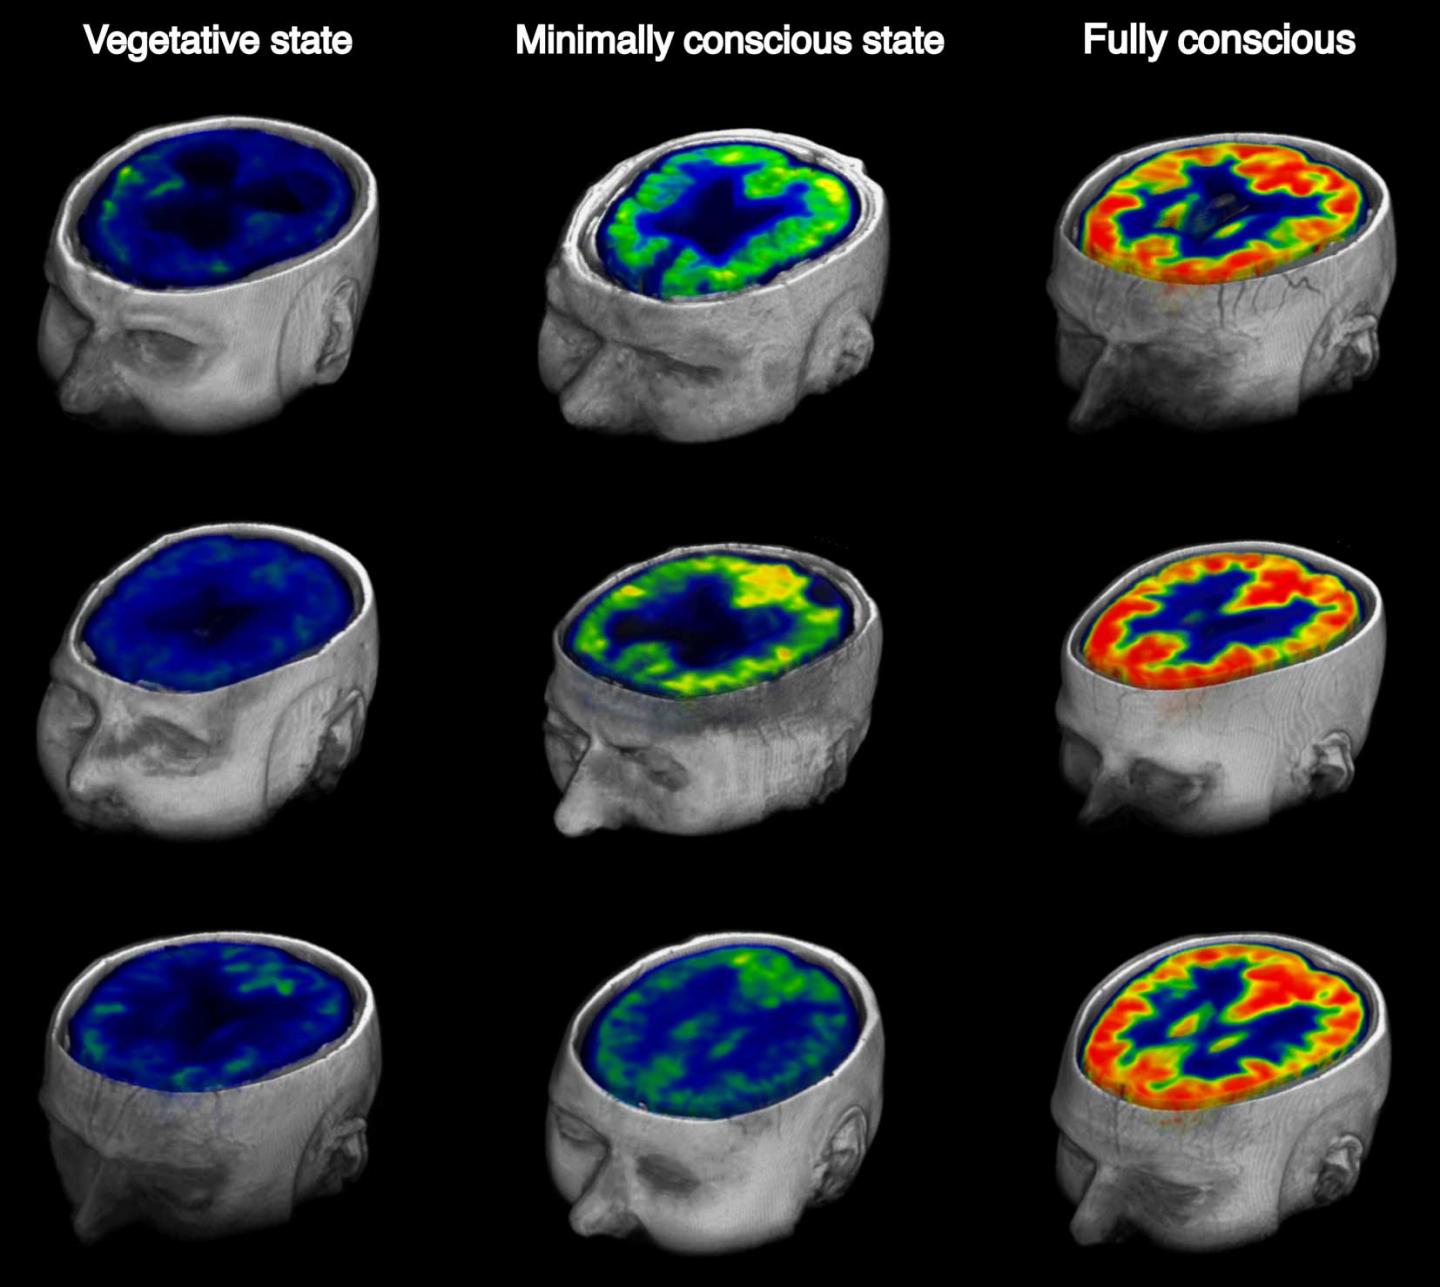 Brain Glucose Metabolism from a Vegetative to Conscious State